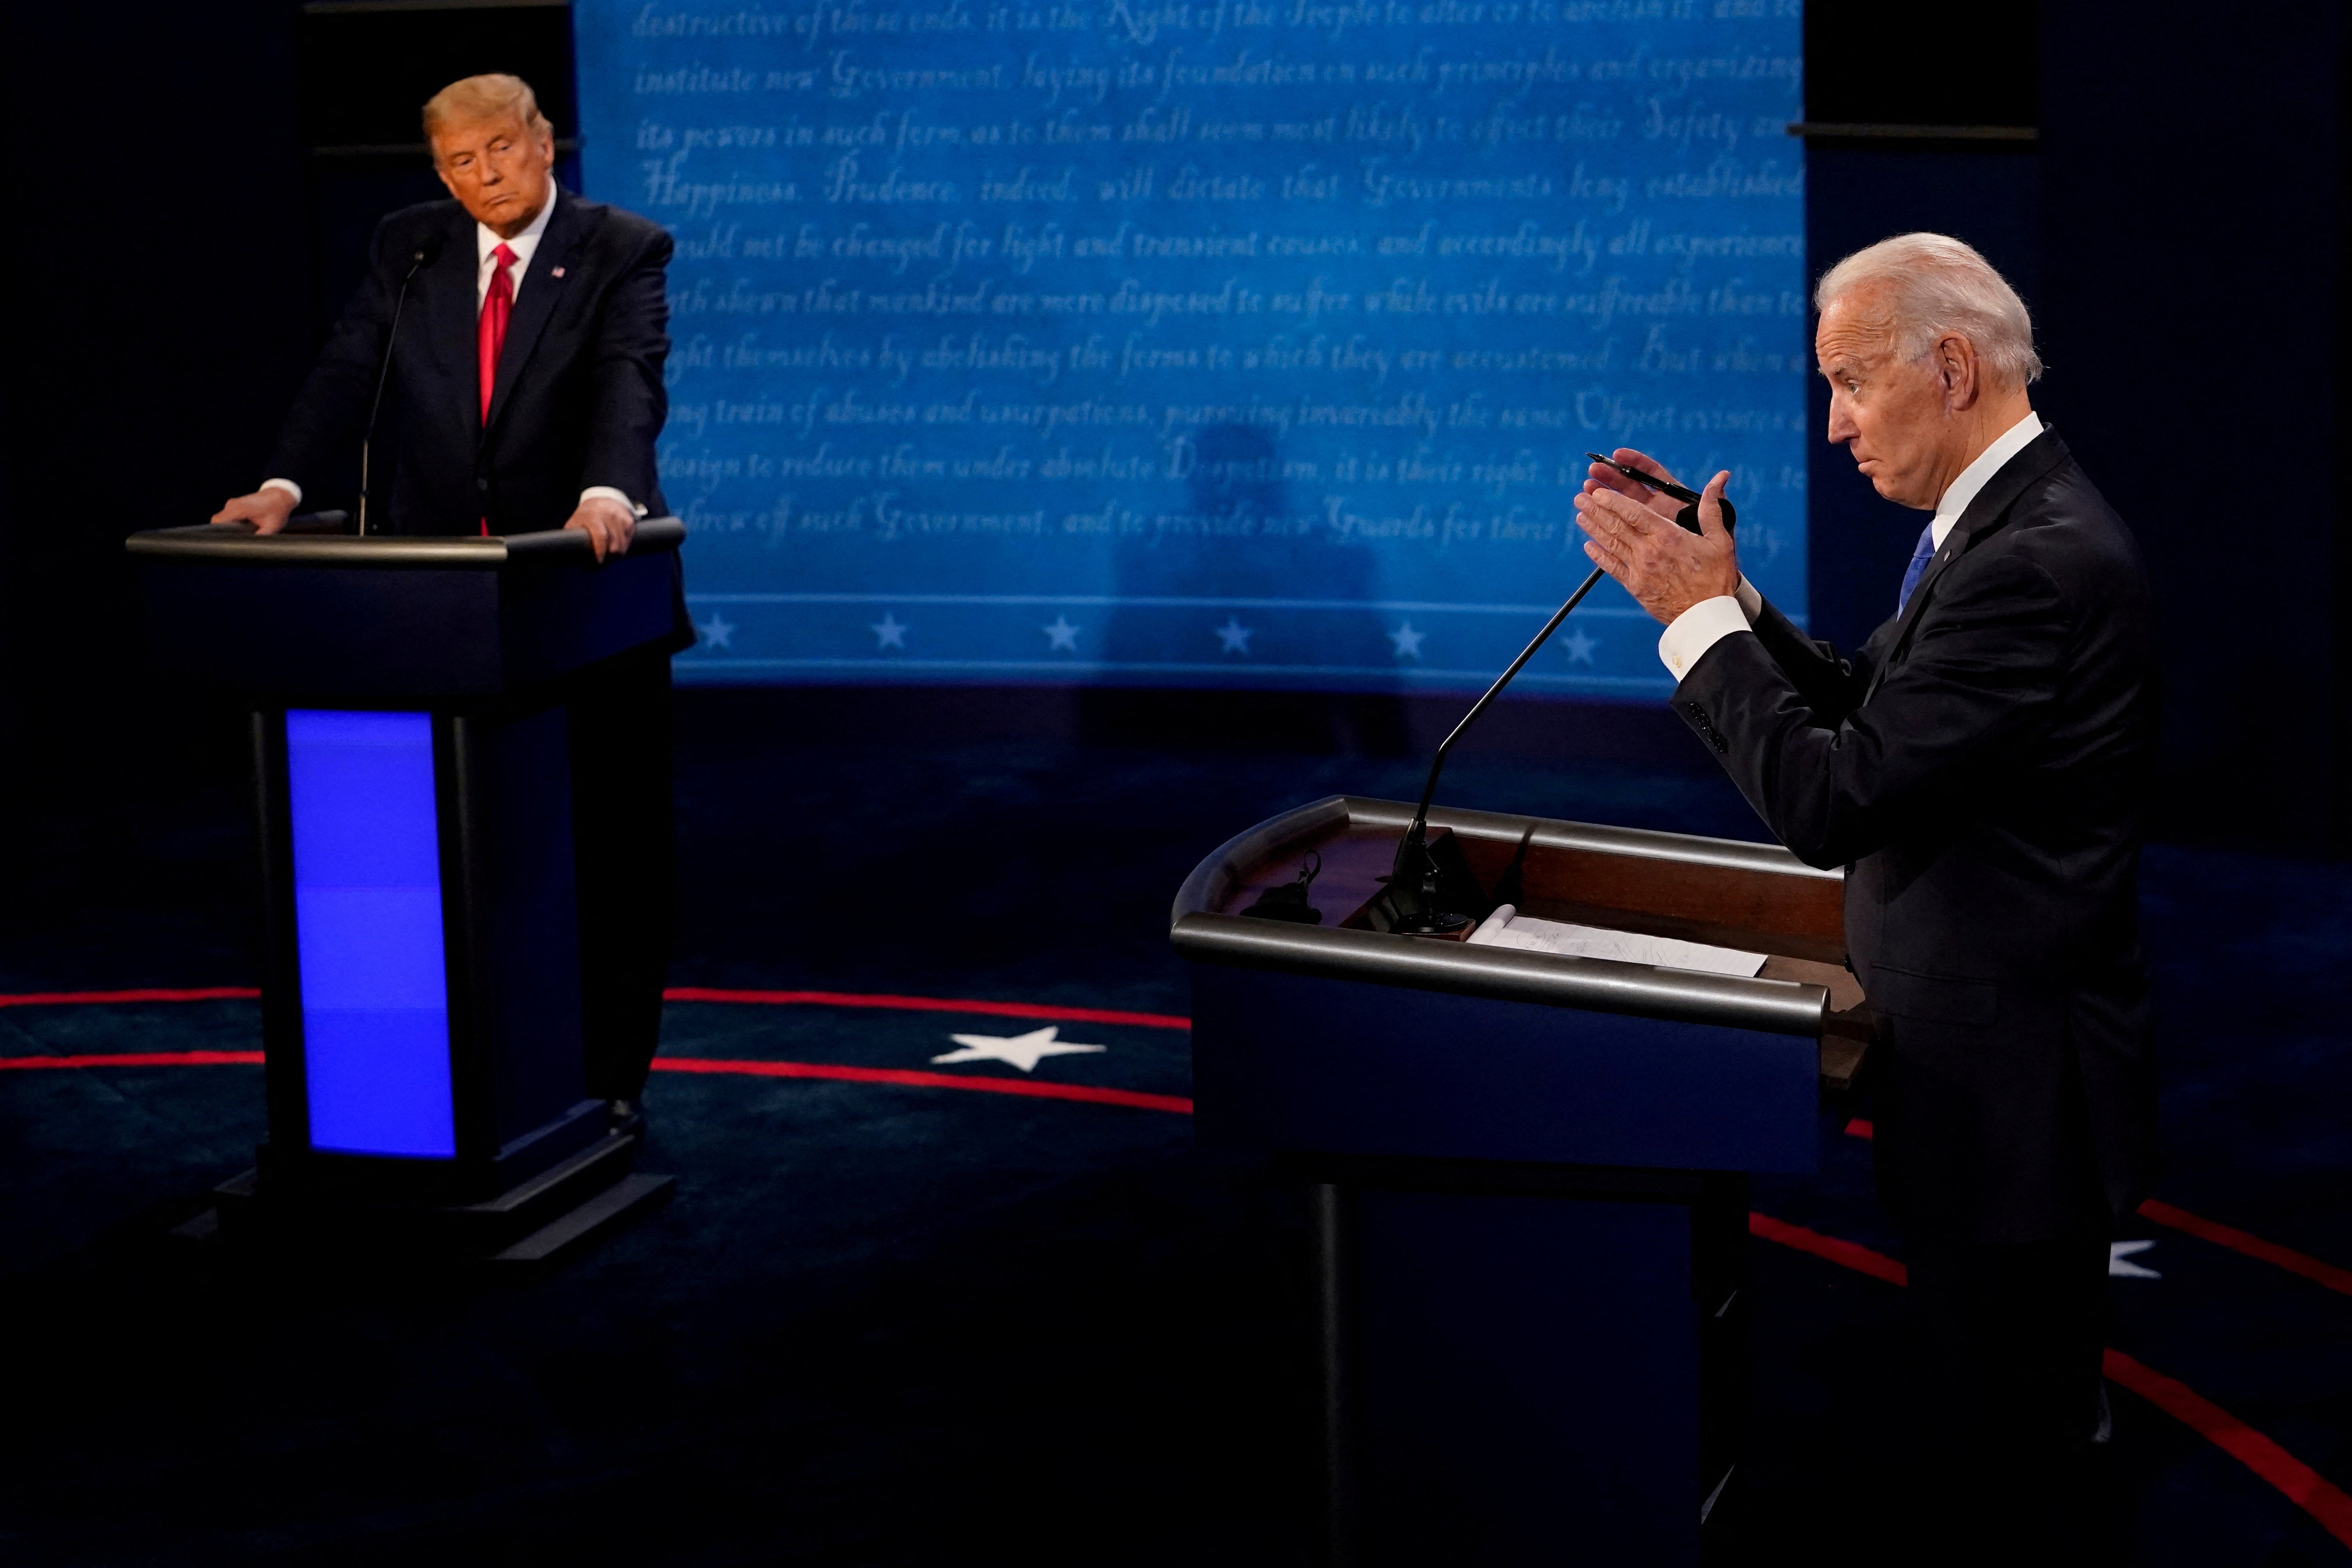 Democratic presidential candidate former Vice President Joe Biden answers a question as President Donald Trump listens during the second and final presidential debate in the 2020 election